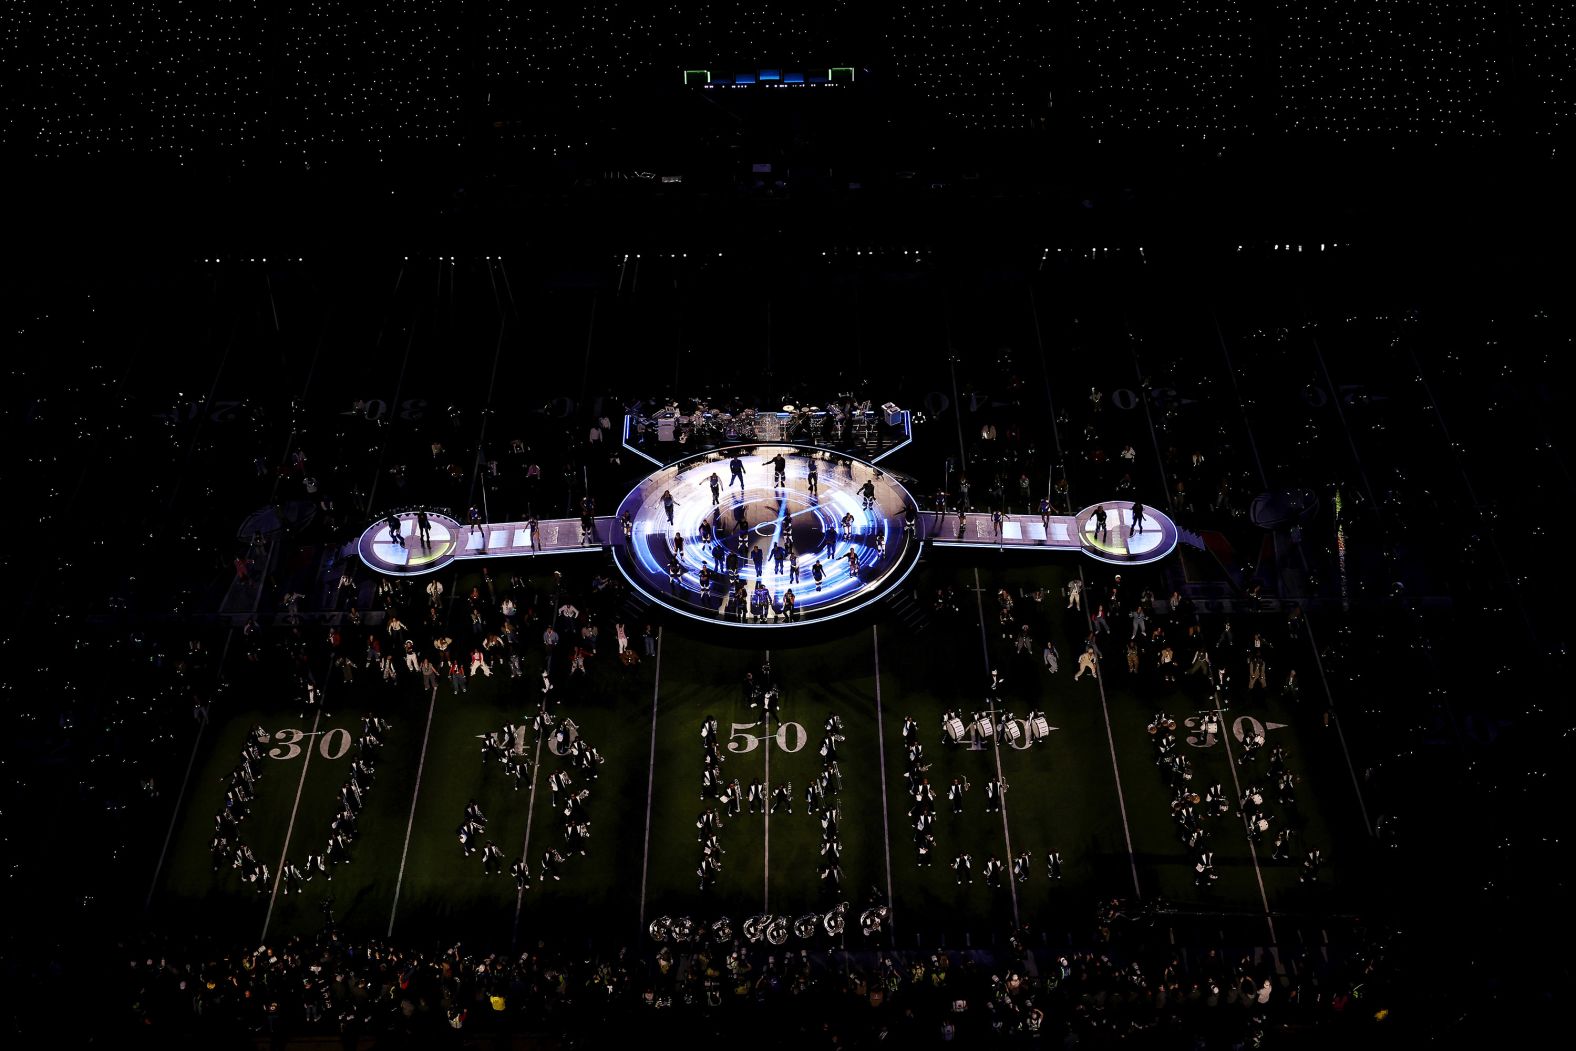 Members of a marching band spell out "Usher" on the field.